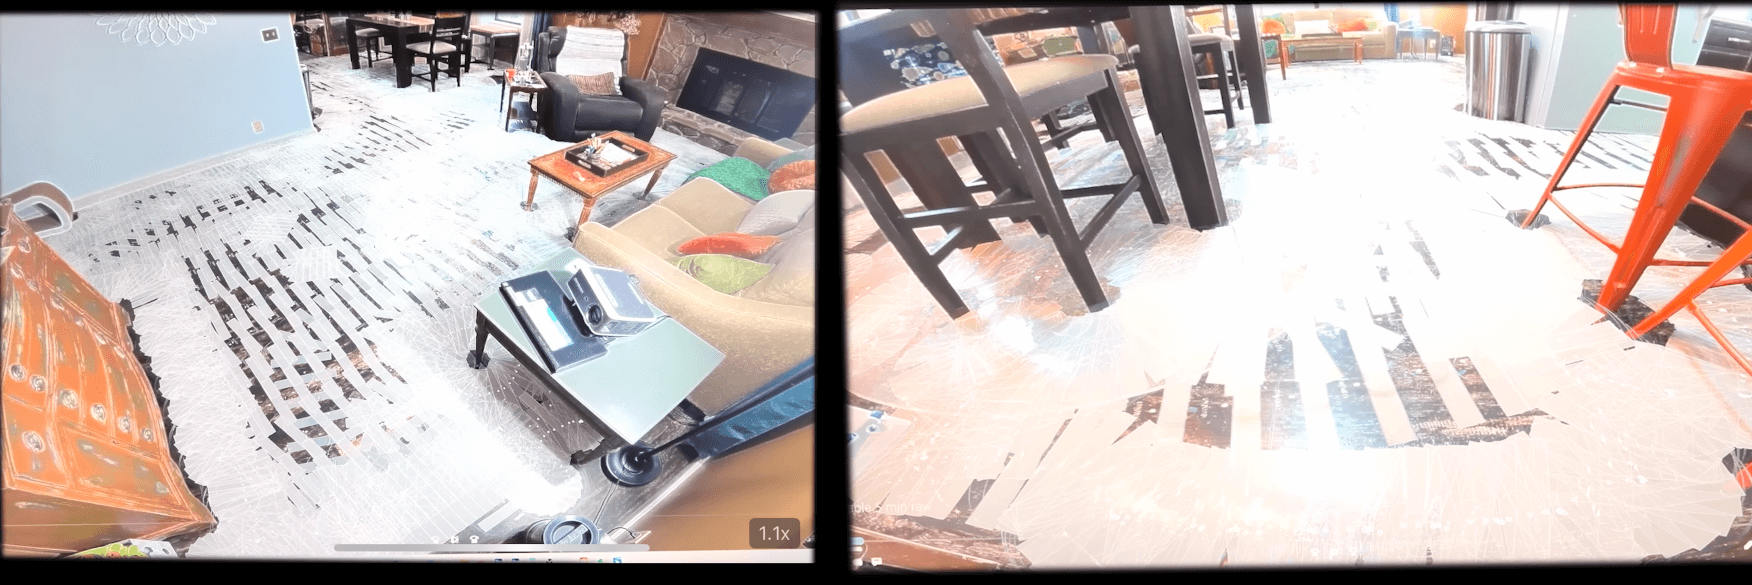 Two panoramic views from the Eureka E10S robot vacuum's app show an overlay of the vacuum's navigational path through a well-furnished room.